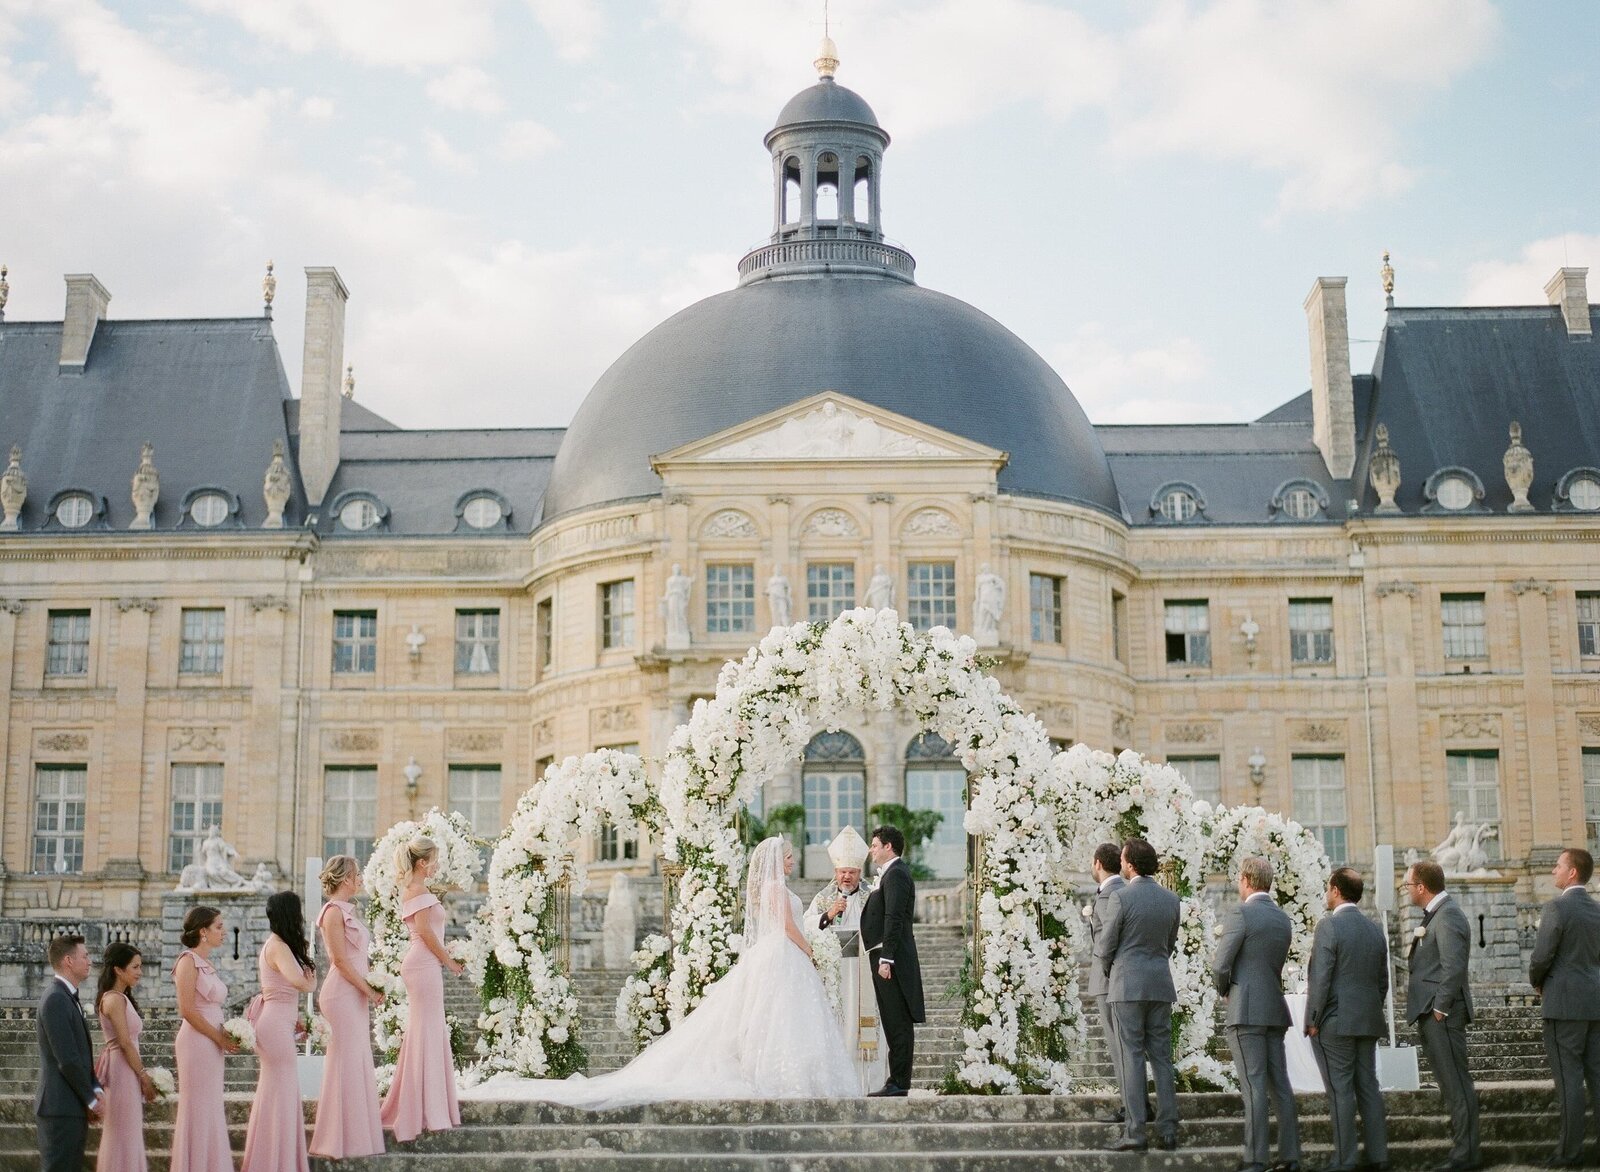 Couple getting married outside chateau in France